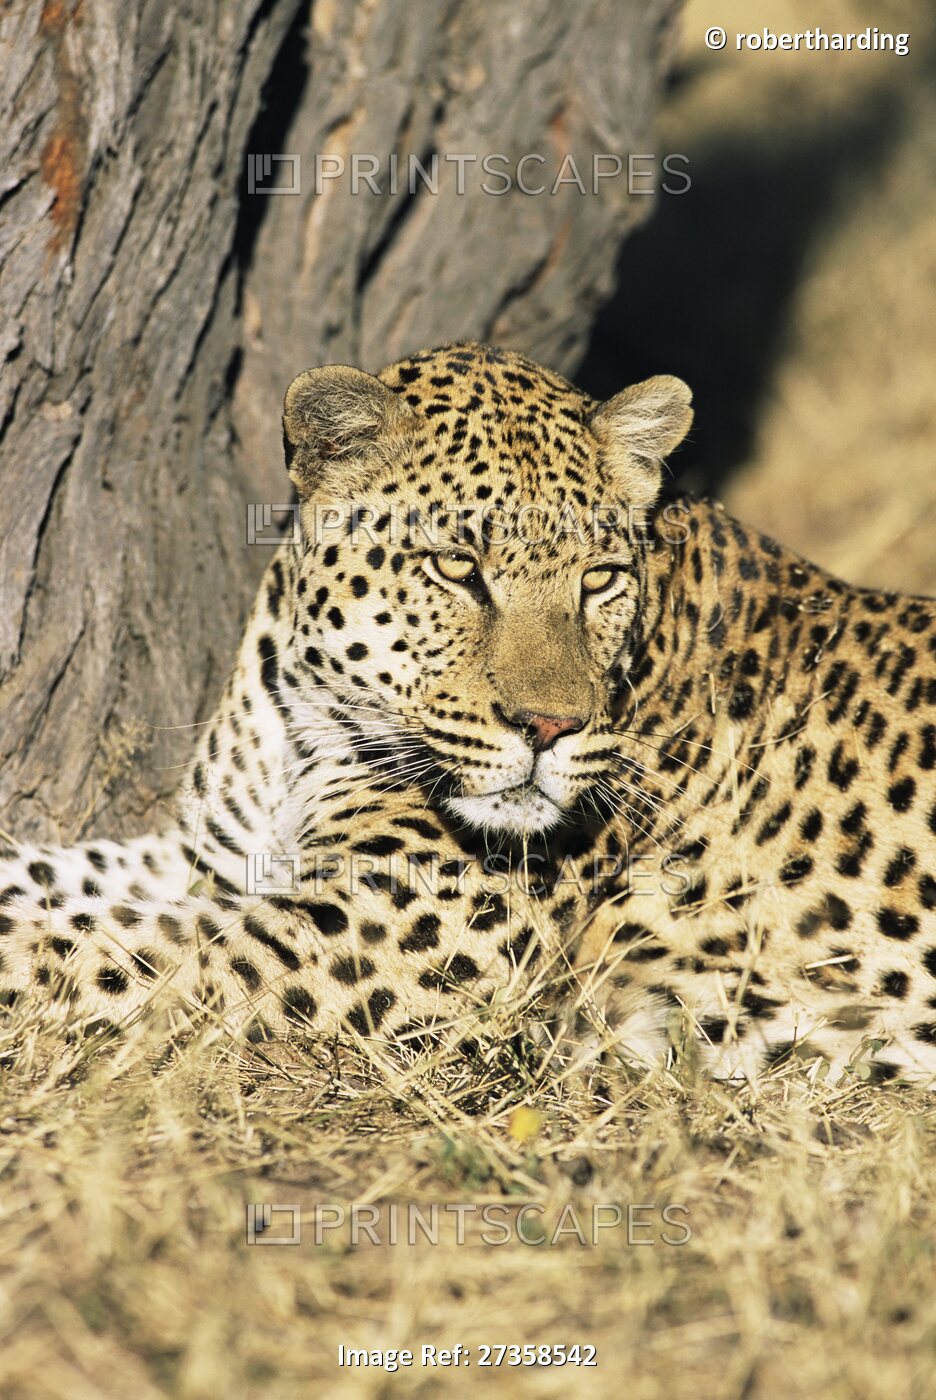 Male leopard, Panthera pardus, in captivity, Namibia, Africa